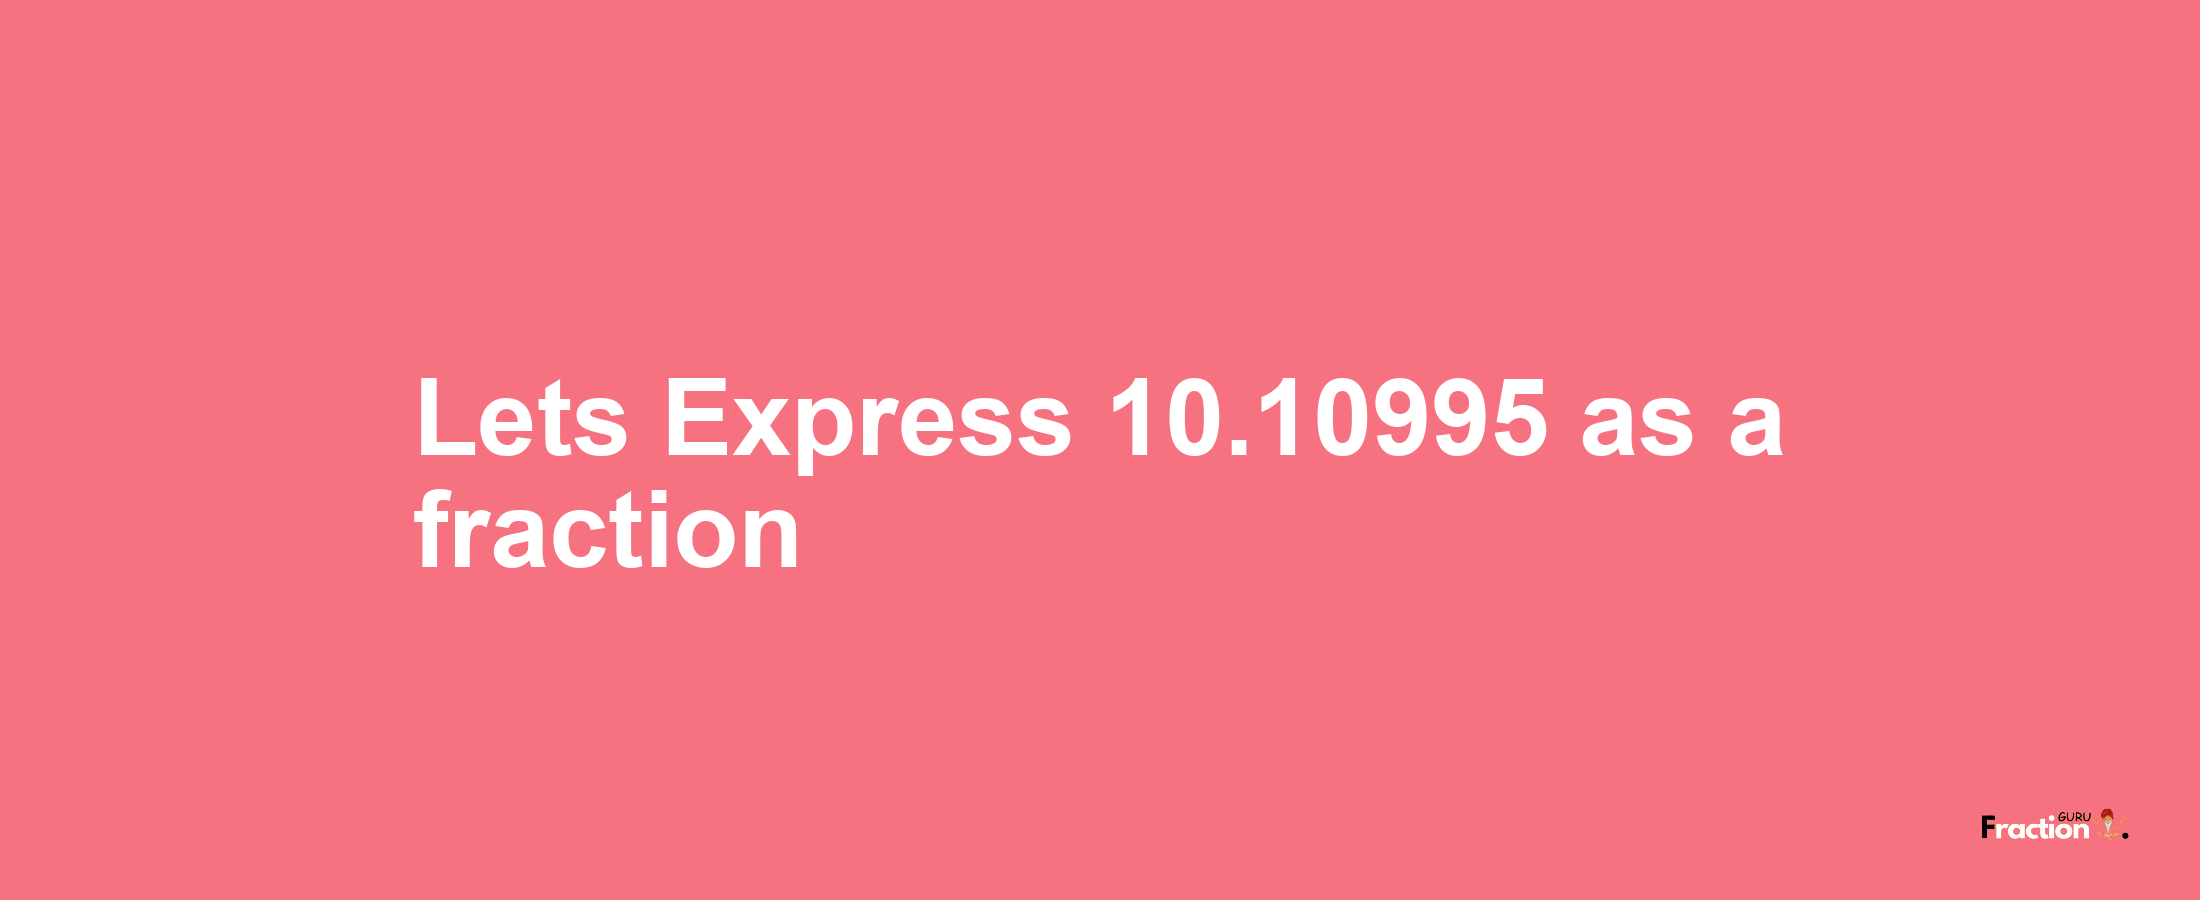 Lets Express 10.10995 as afraction